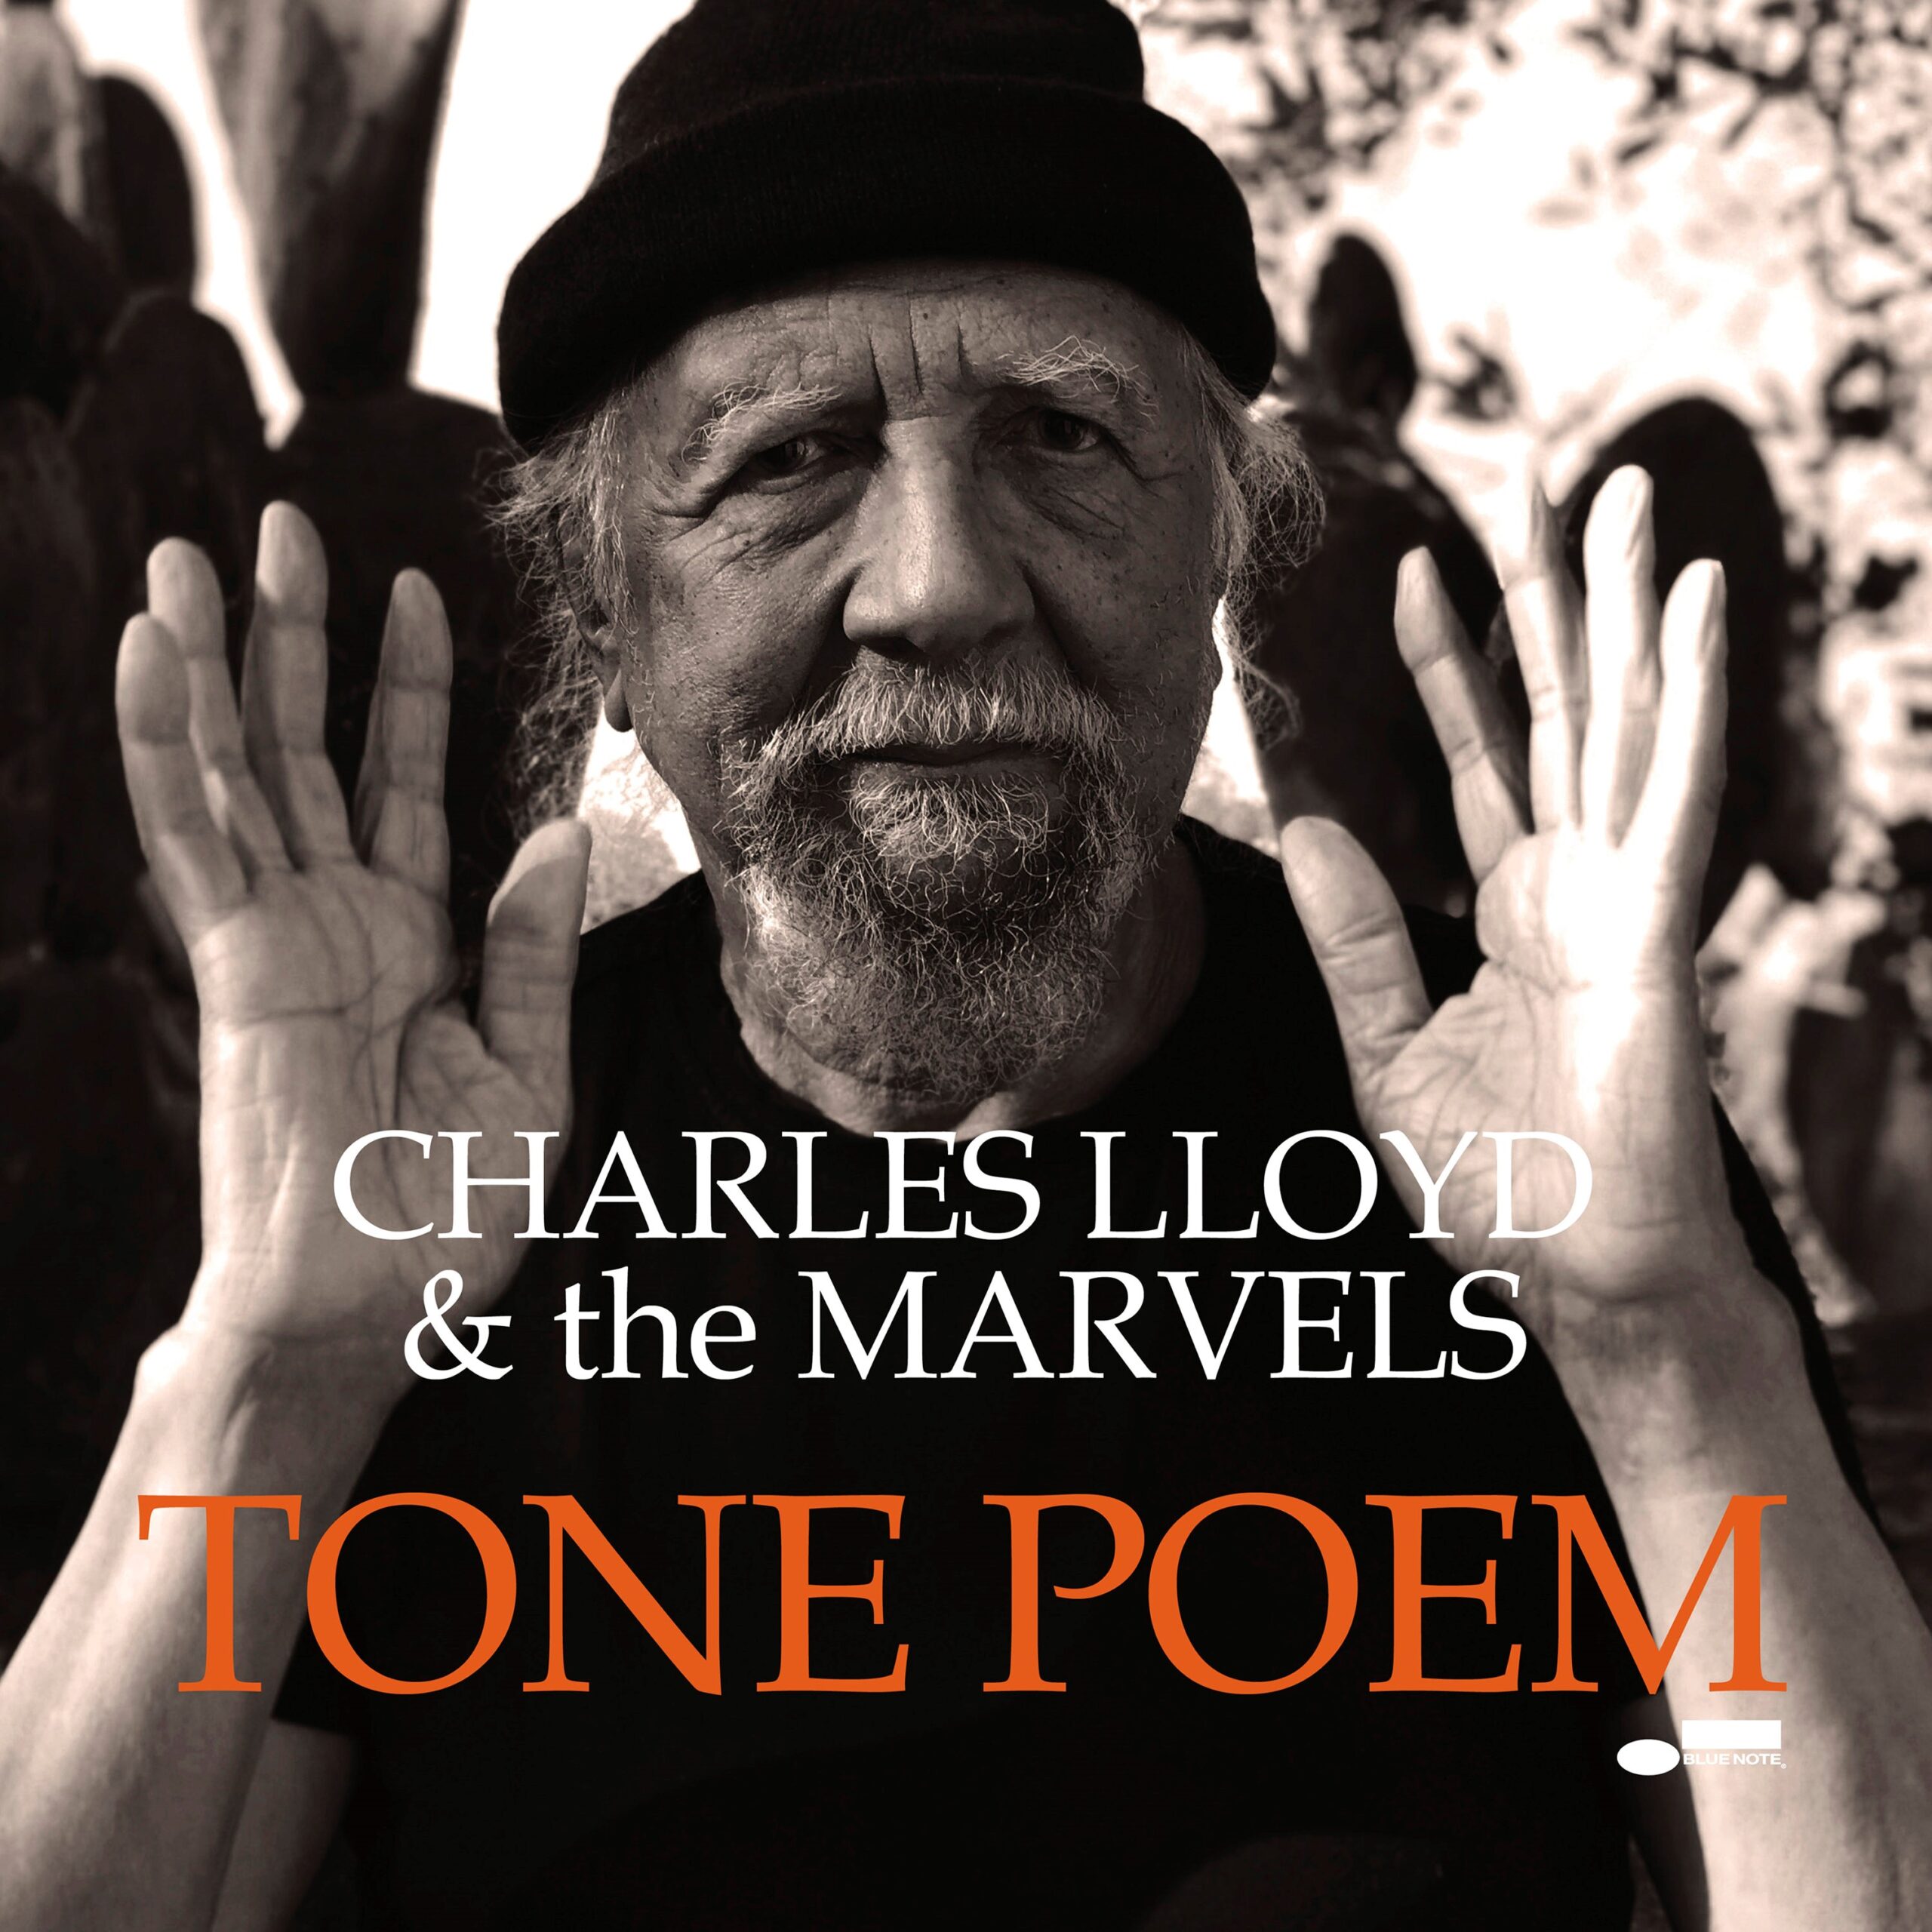 Album Charles Lloyd & the Marvels Tone Poem. Review by